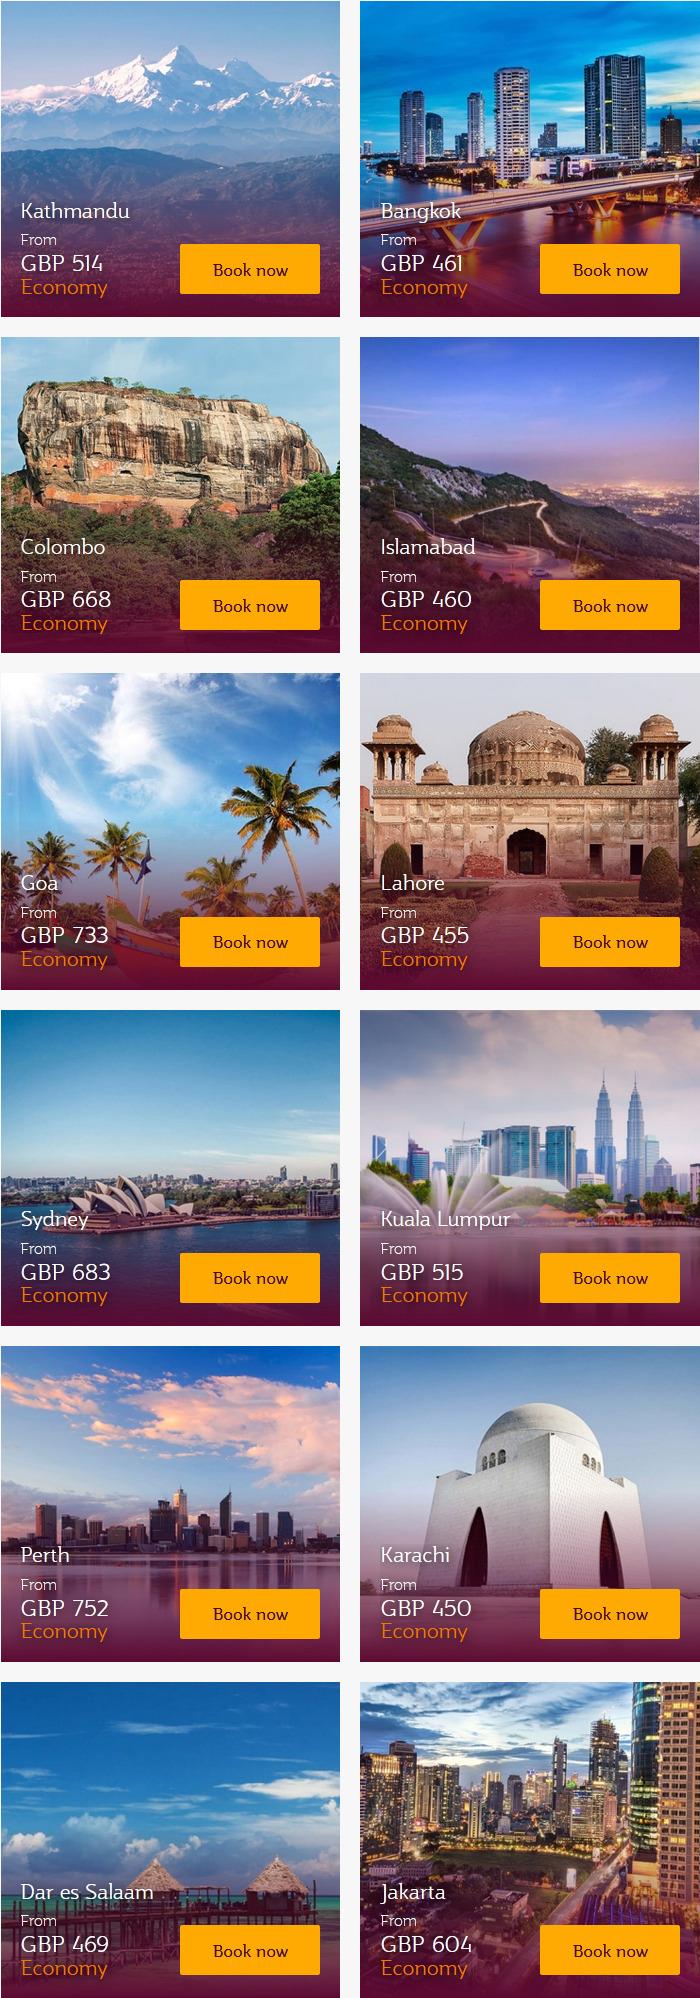 Special Fares from London Heathrow 5 Oct 2020